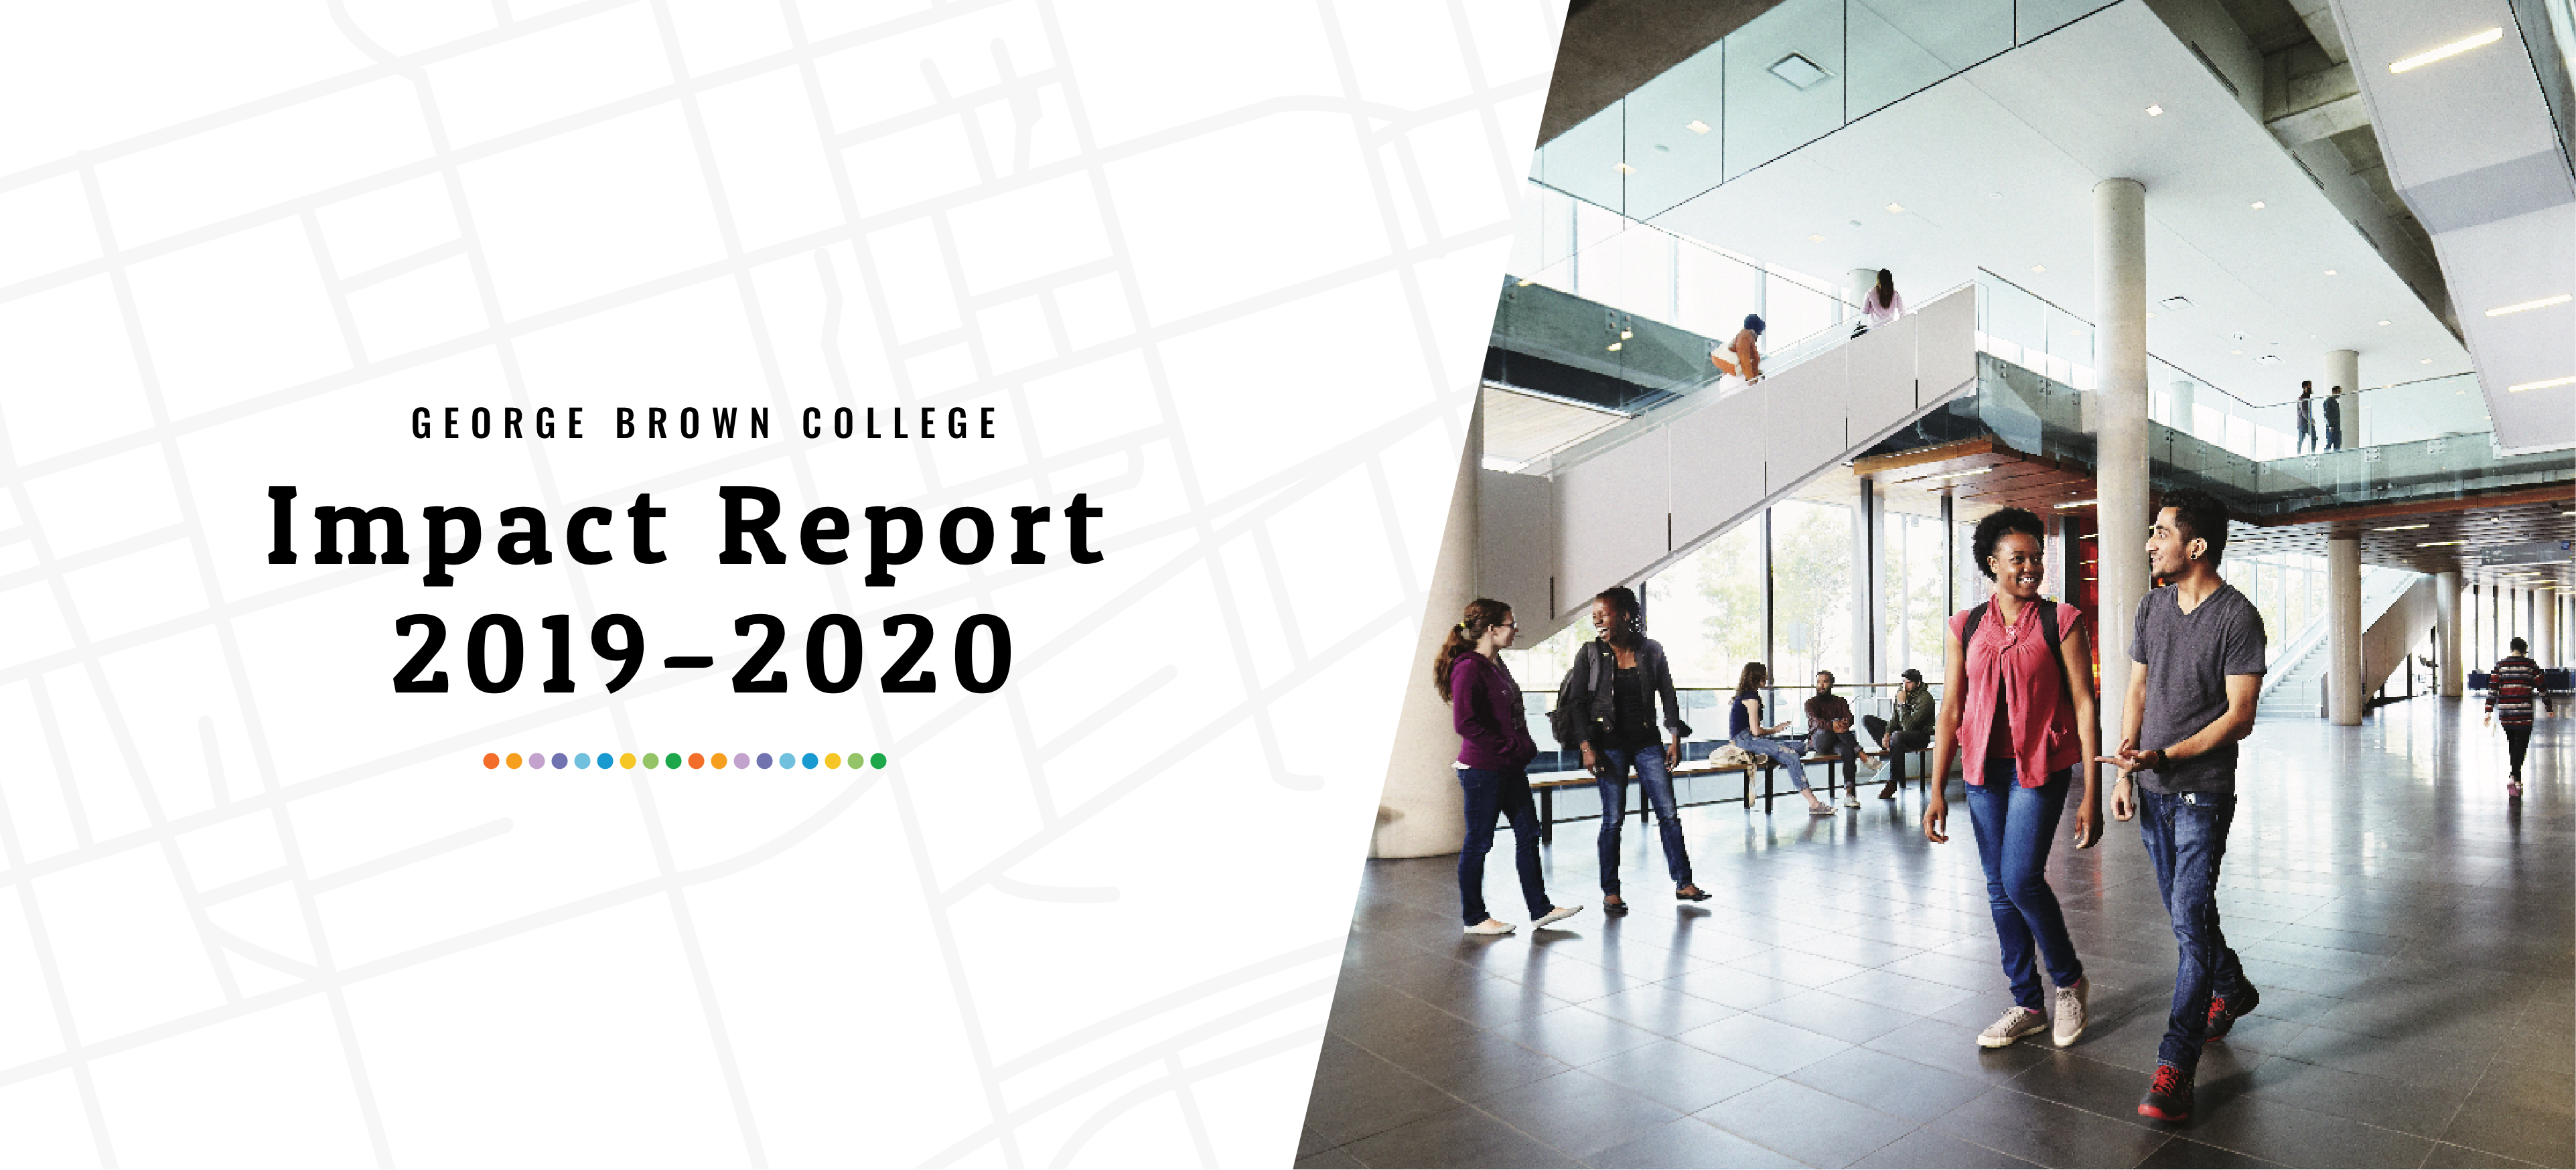 Impact Report 2019-2020. Students socialize while walking through the Waterfront Campus lobby.